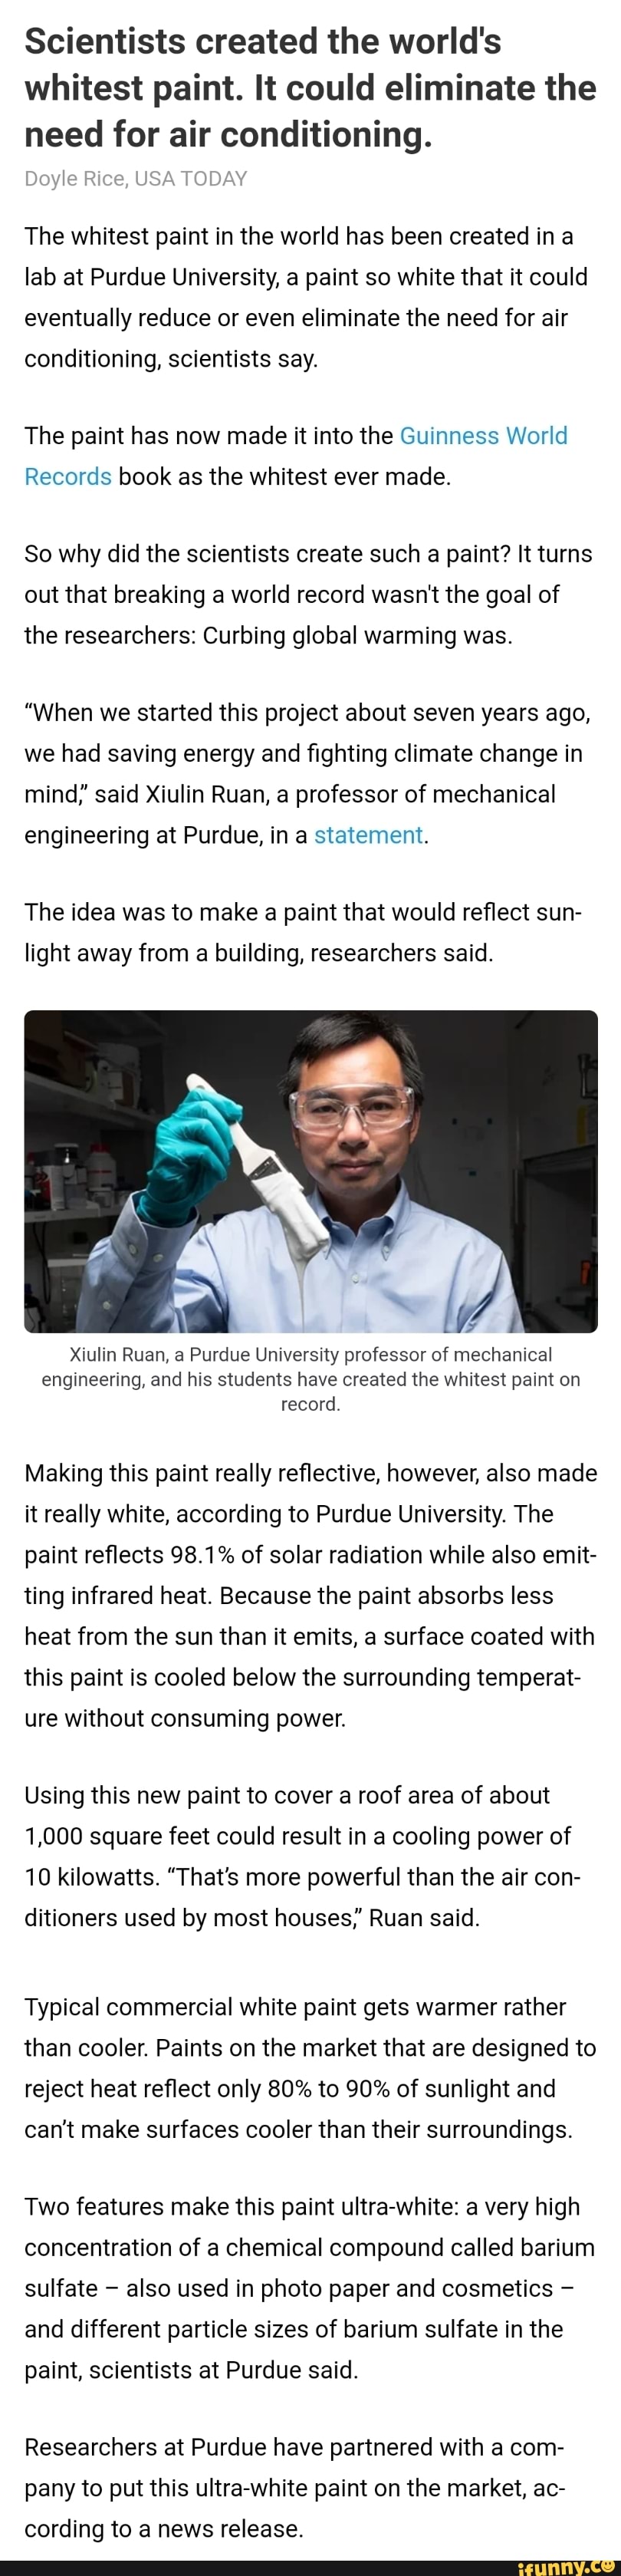 Researchers Create UltraWhite Paint, Cools Buildings by Reflecting